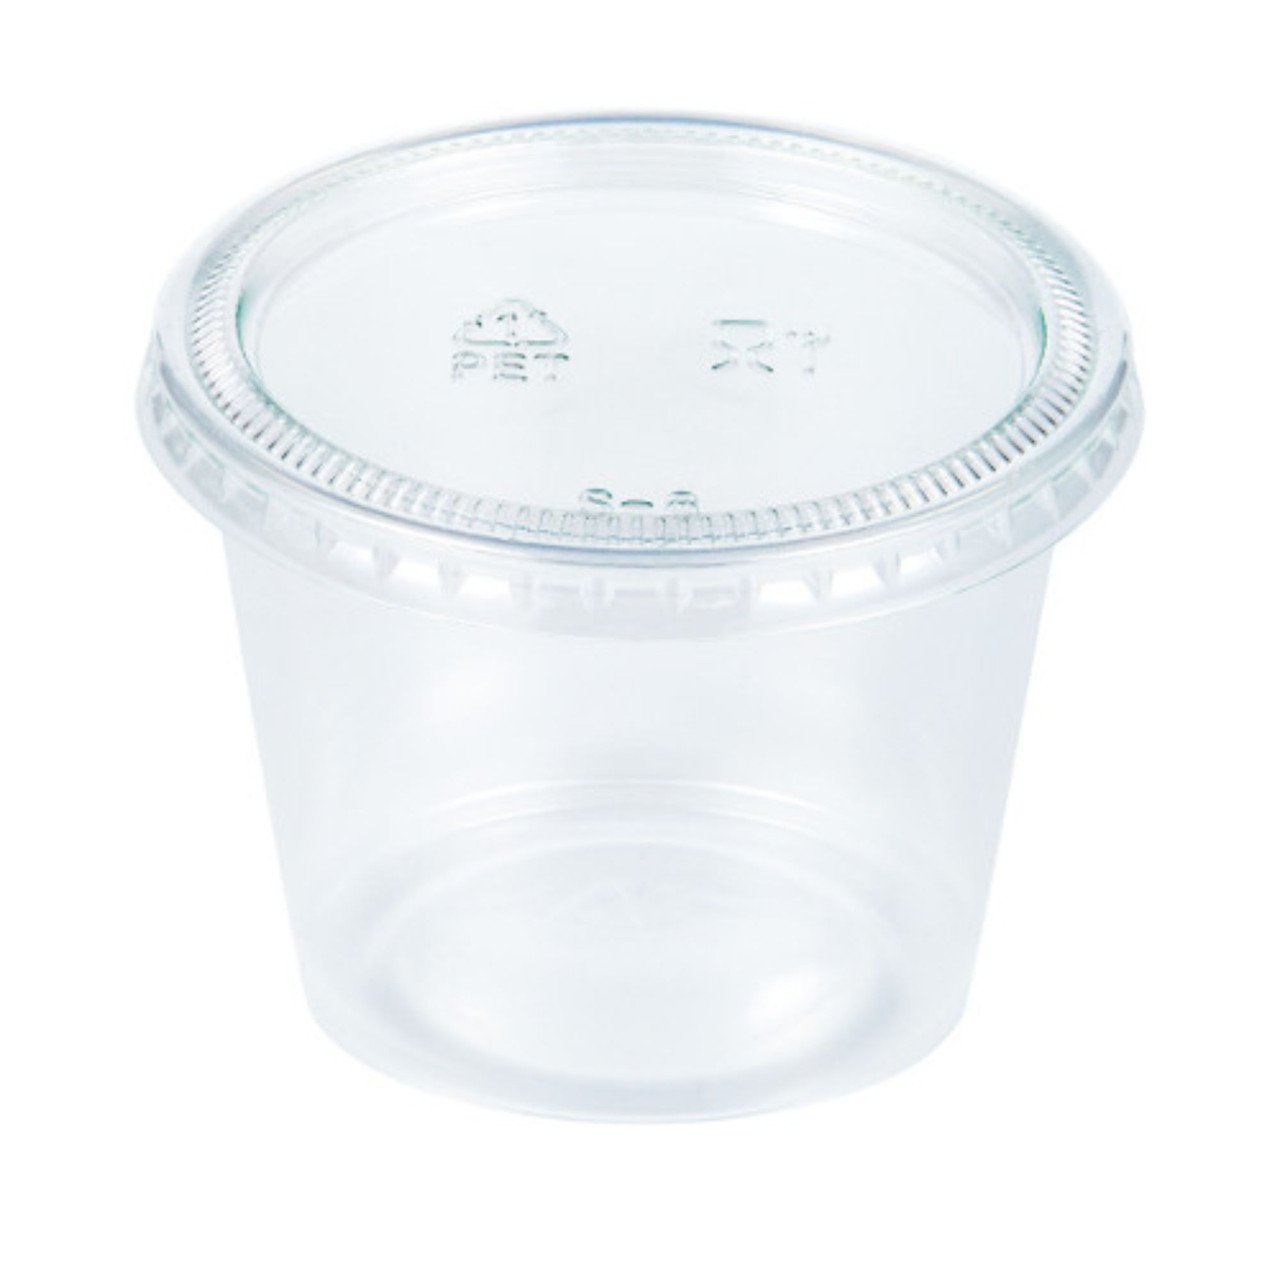 Disposable Plastic Cups With Lids For Drinks, Desserts, Christmas